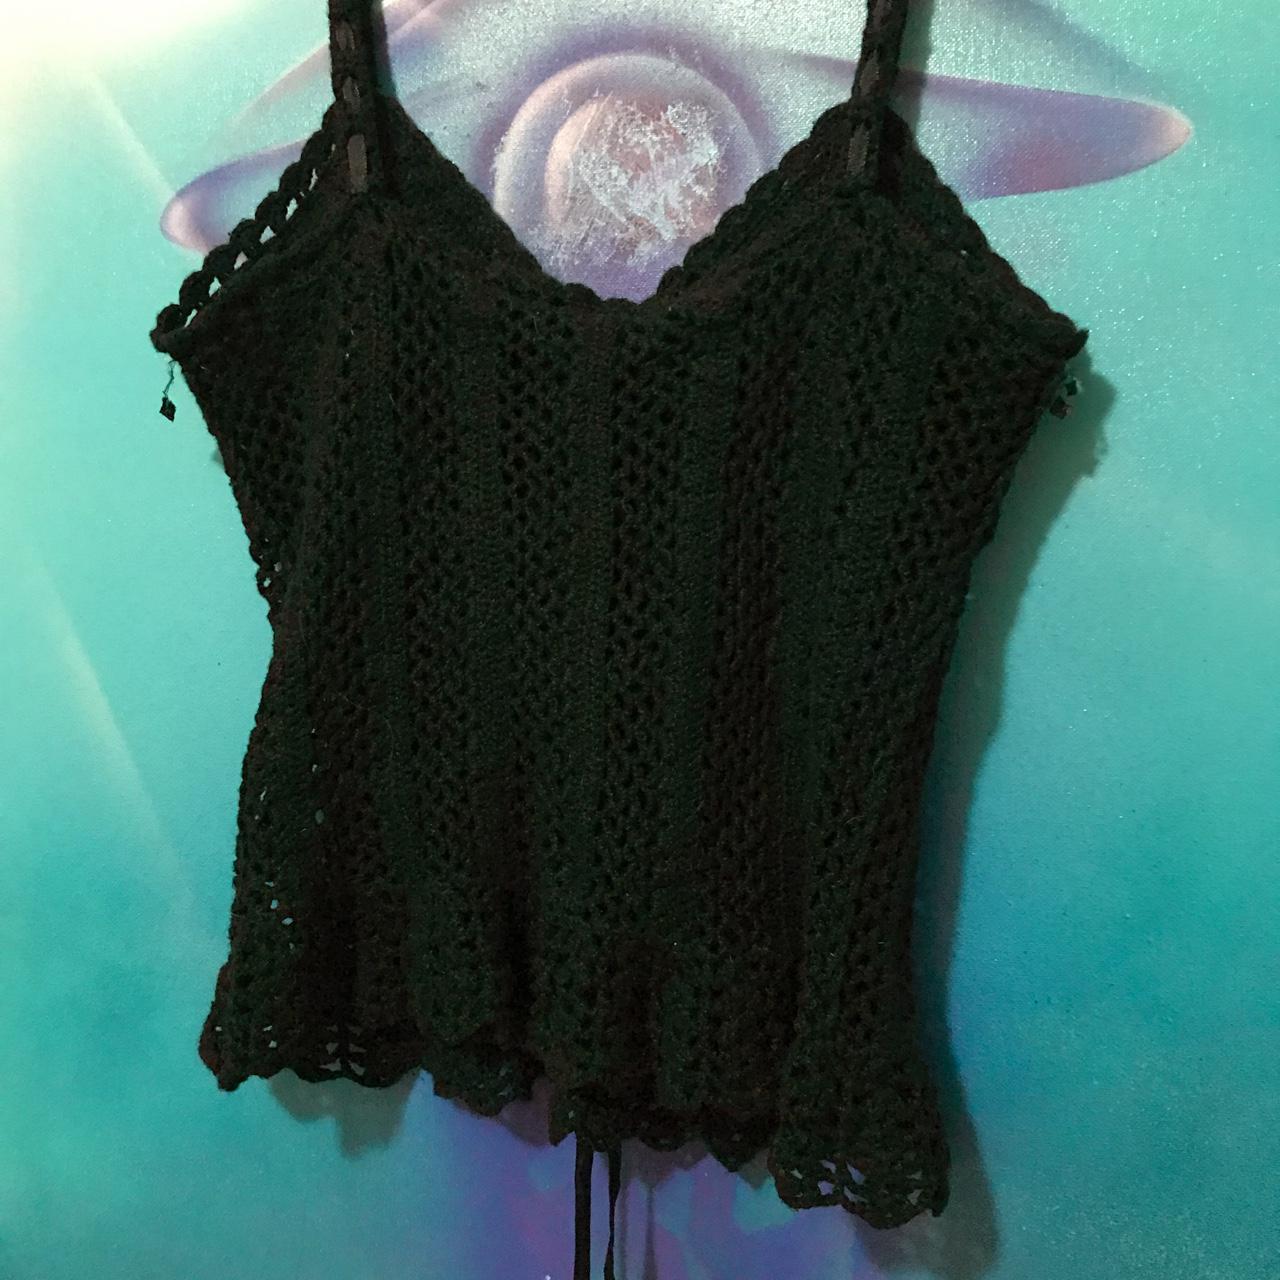 Product Image 2 - Black knit cami top
With laced